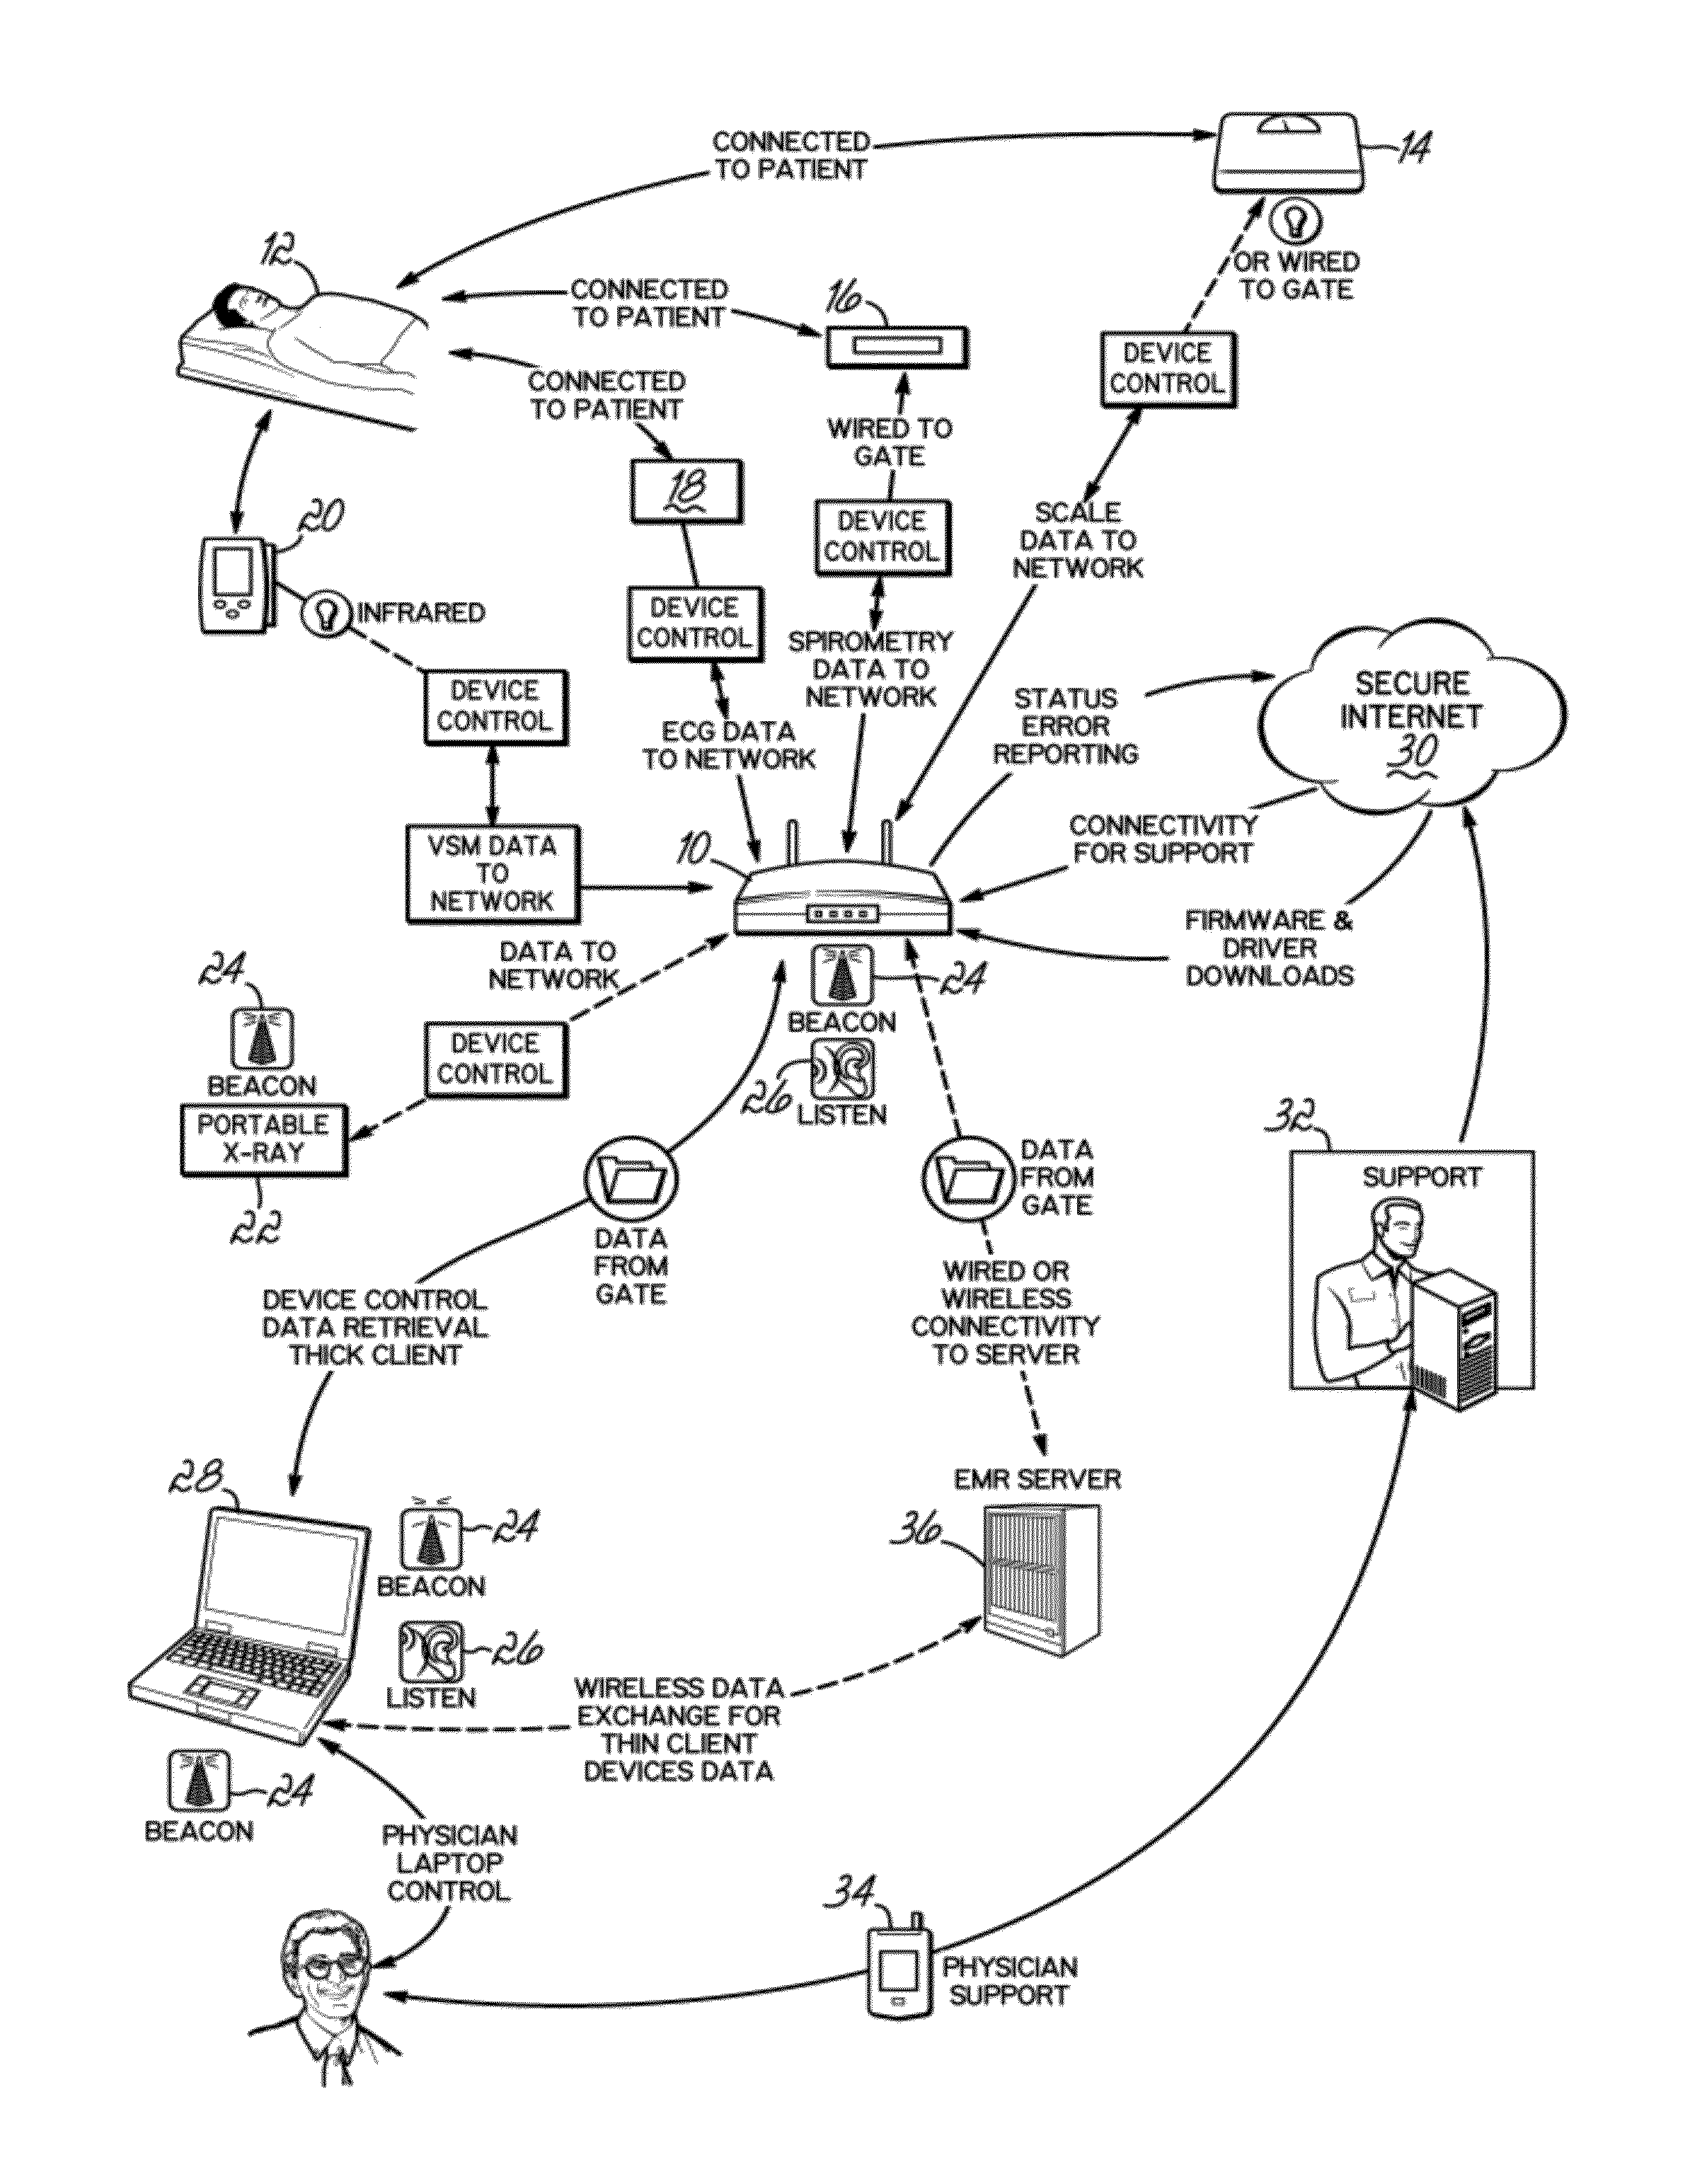 Networked interface appliance for improved medical device integration and physician workflow